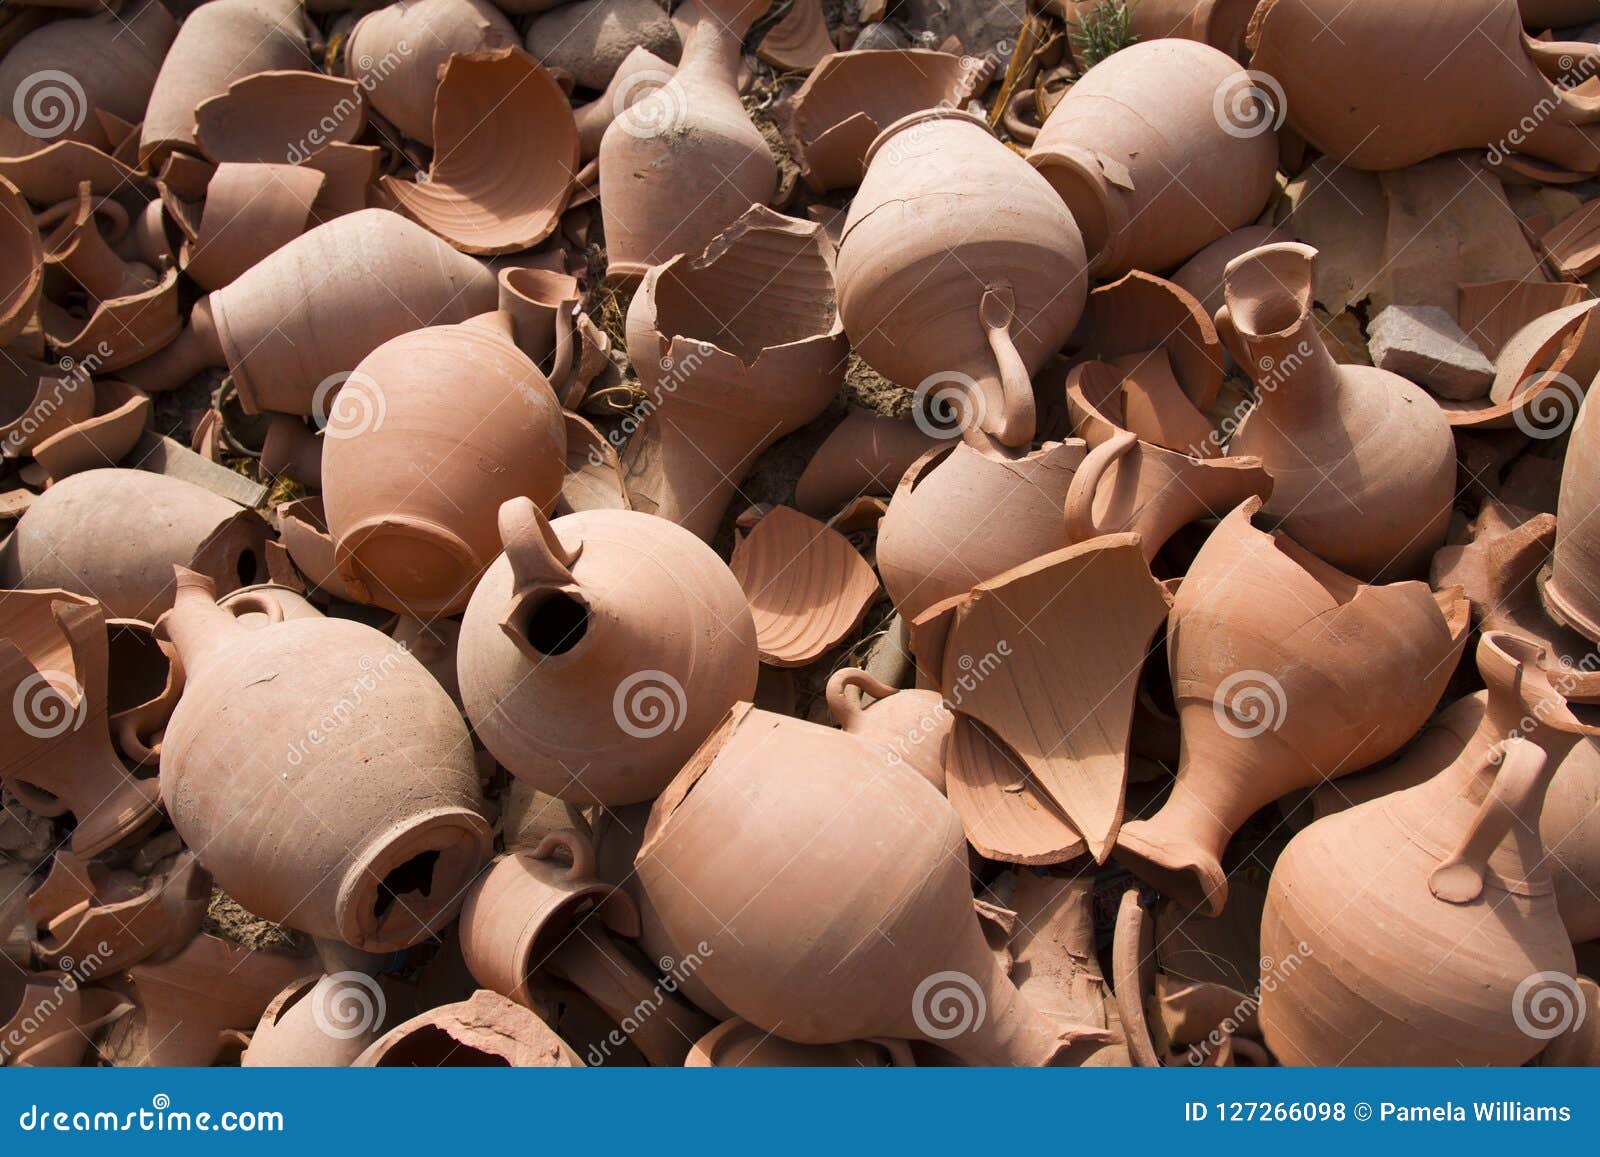 Pottery Broken Into Many Pieces Stock Photo Image of 